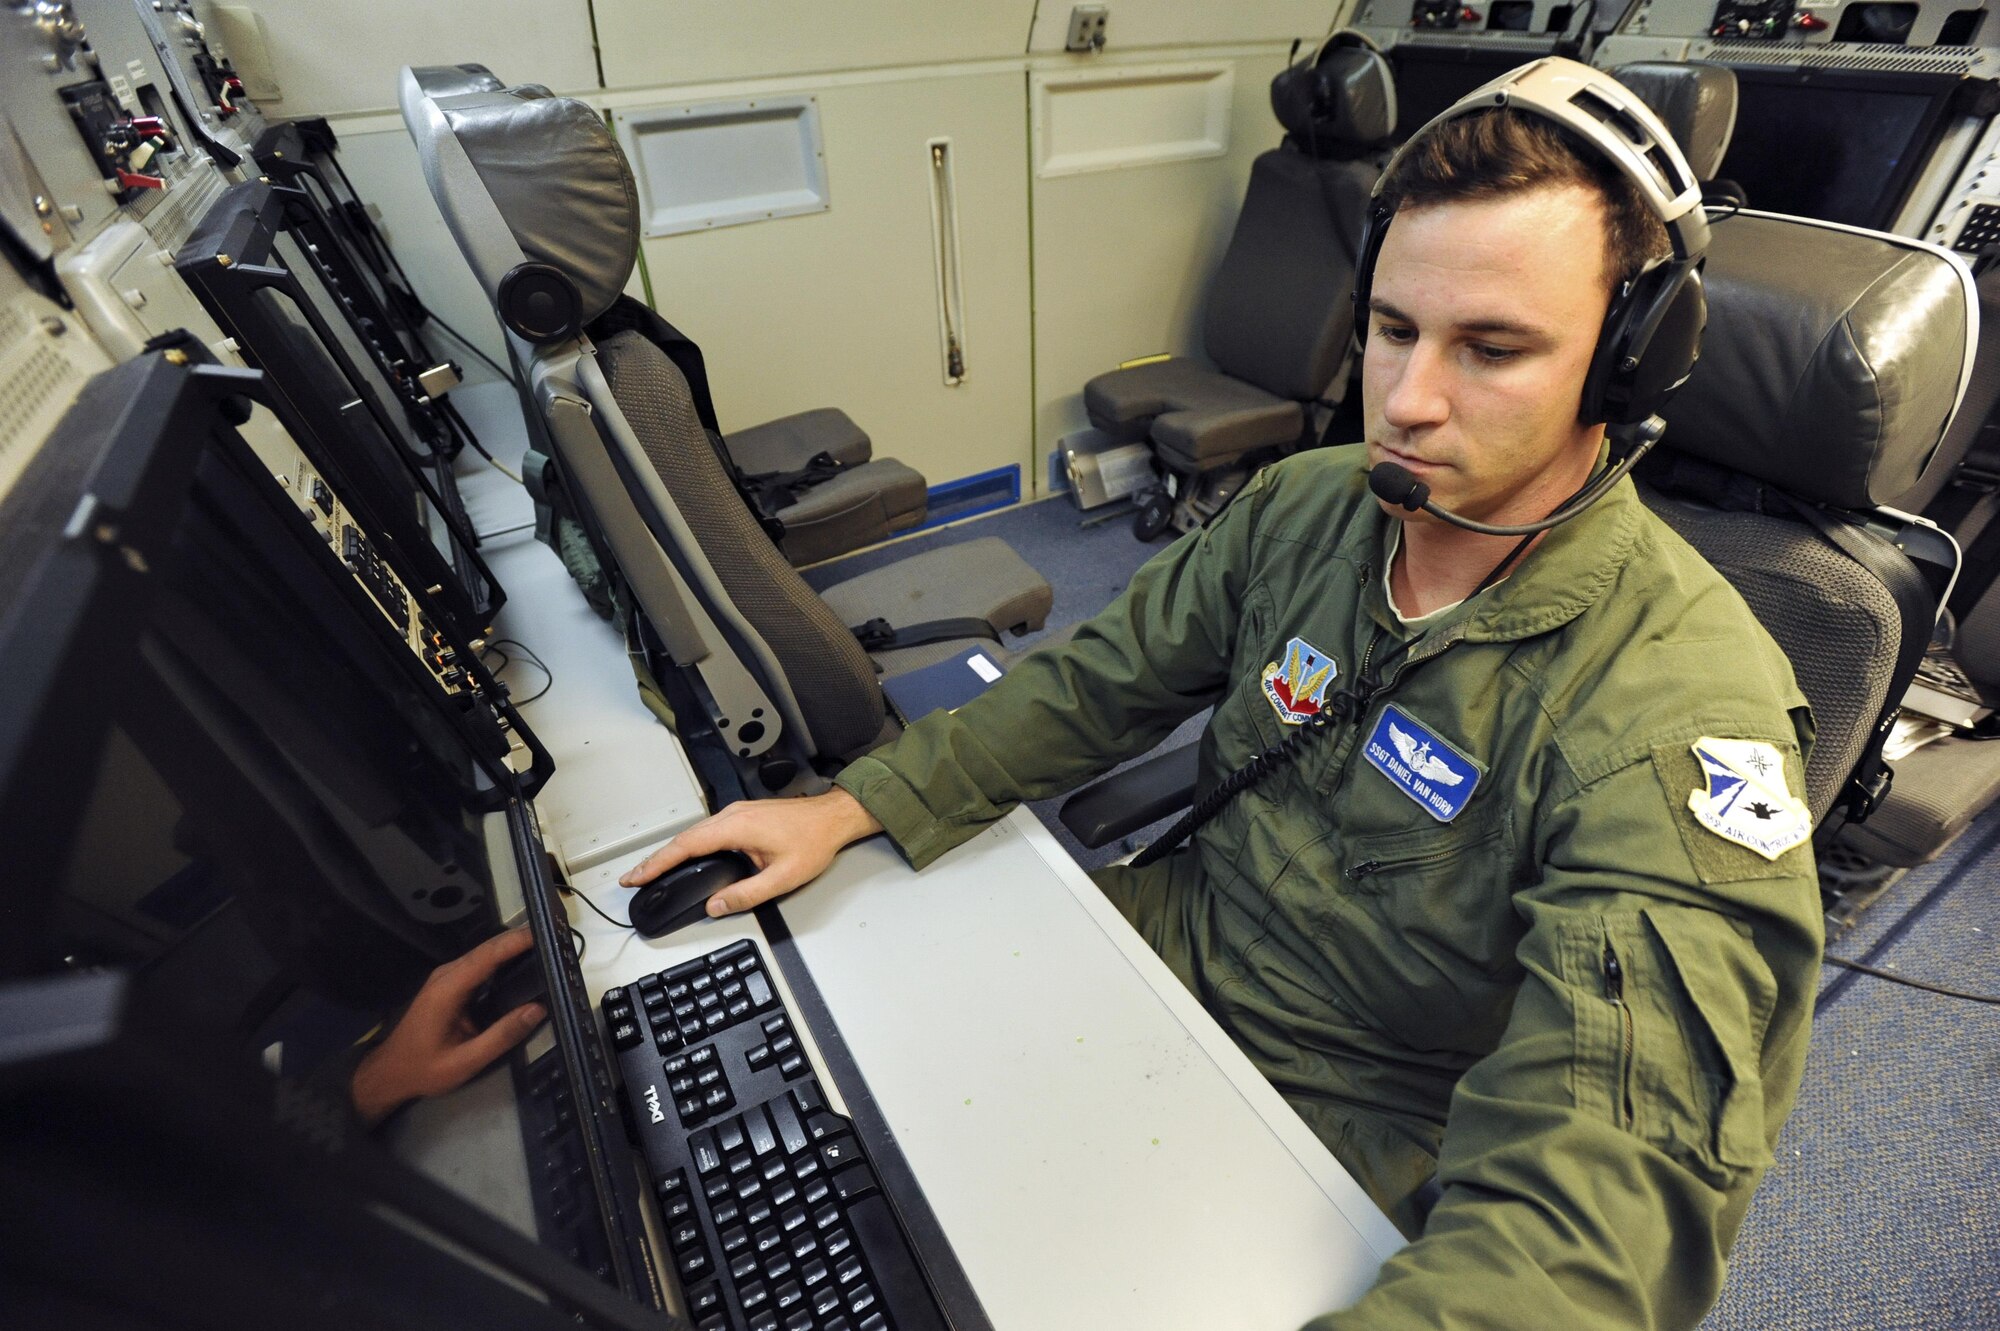 U.S. Air Force Staff Sgt. Daniel Van Horn, 966th Airborne Air Control Squadron, Oklahoma City, an airborne surveillance technician on an E-3G Airborne Warning and Control System aircraft, prepares for a mission above the Joint Pacific Alaska Range Complex during Exercise Northern Edge June 25, 2015. Thousands of service members from all the branch services including active duty, Reserve and National Guard units participated. (U.S. Air Force photo/ Staff Sgt. William Banton)